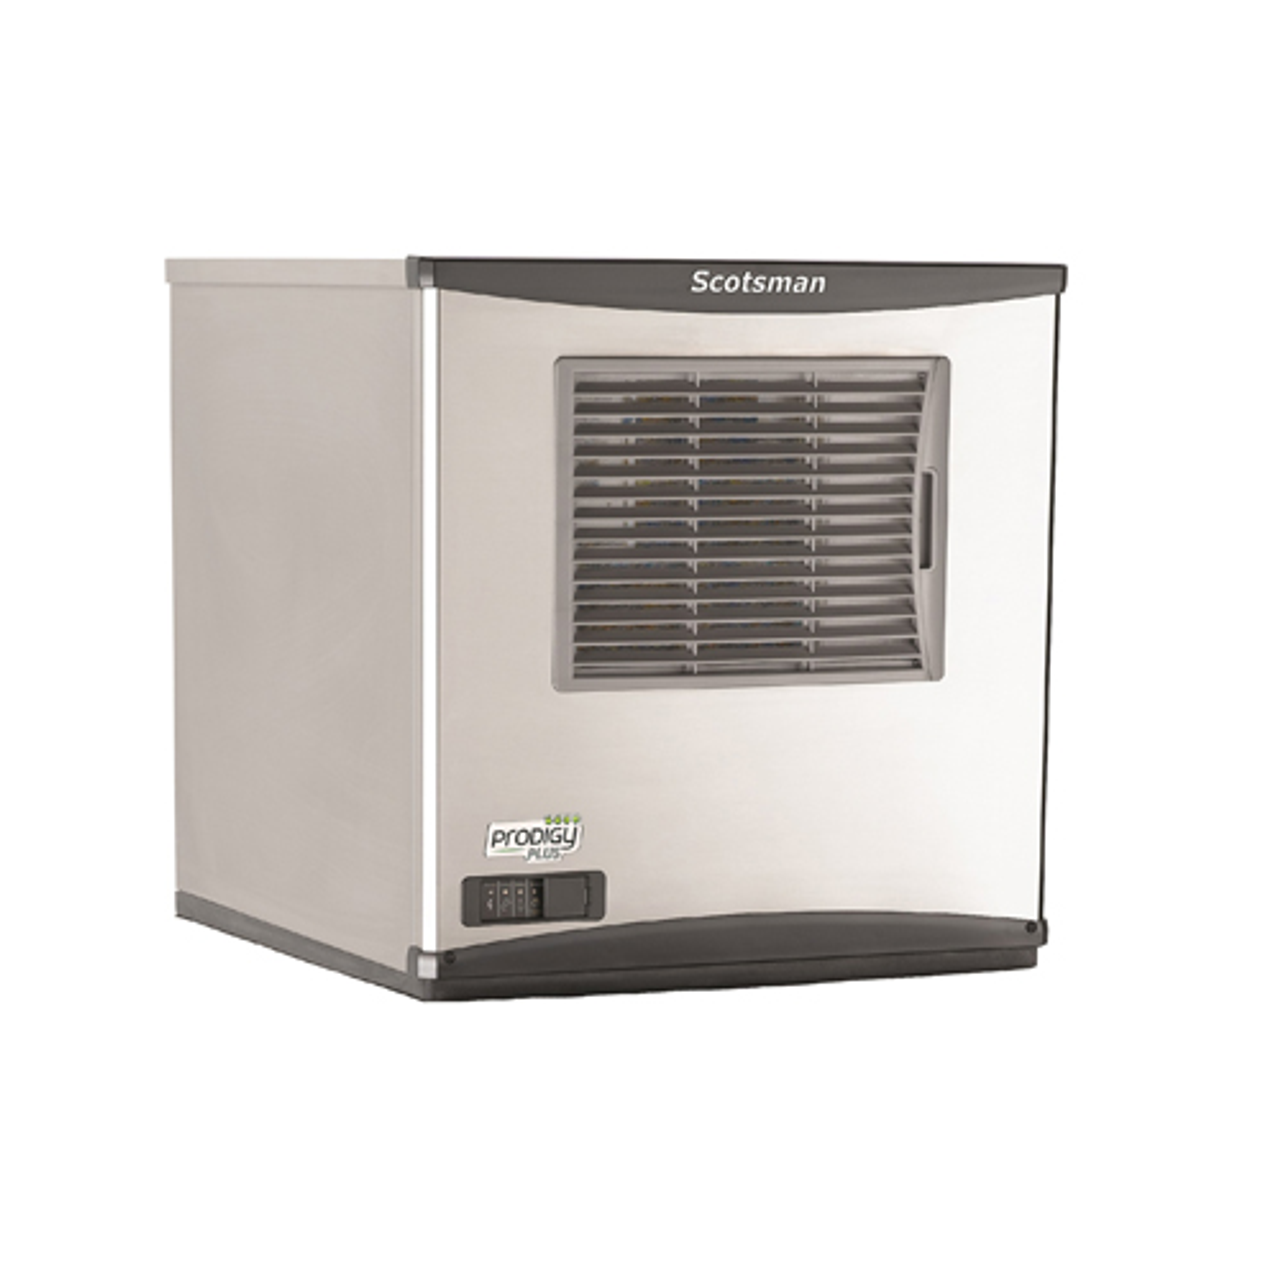 Prodigy Plus® Ice Maker, nugget style, Original Chewable Ice®, air-cooled, self-contained condenser, production capacity up to 420 lb/24 hours at 70°/50° (348 lb AHRI certified at 90°/70°), sealed maintenance-free bearings, AutoAlert™ indicating lights, front facing removable air filter, unit specific QR code, stainless auger and evaporator, one-touch cleaning, stainless steel finish, AgION™ antimicrobial protection, R-404A refrigerant, 115v/60/1-ph, 12.9 amps, NSF, cULus, engineered and assembled in USA